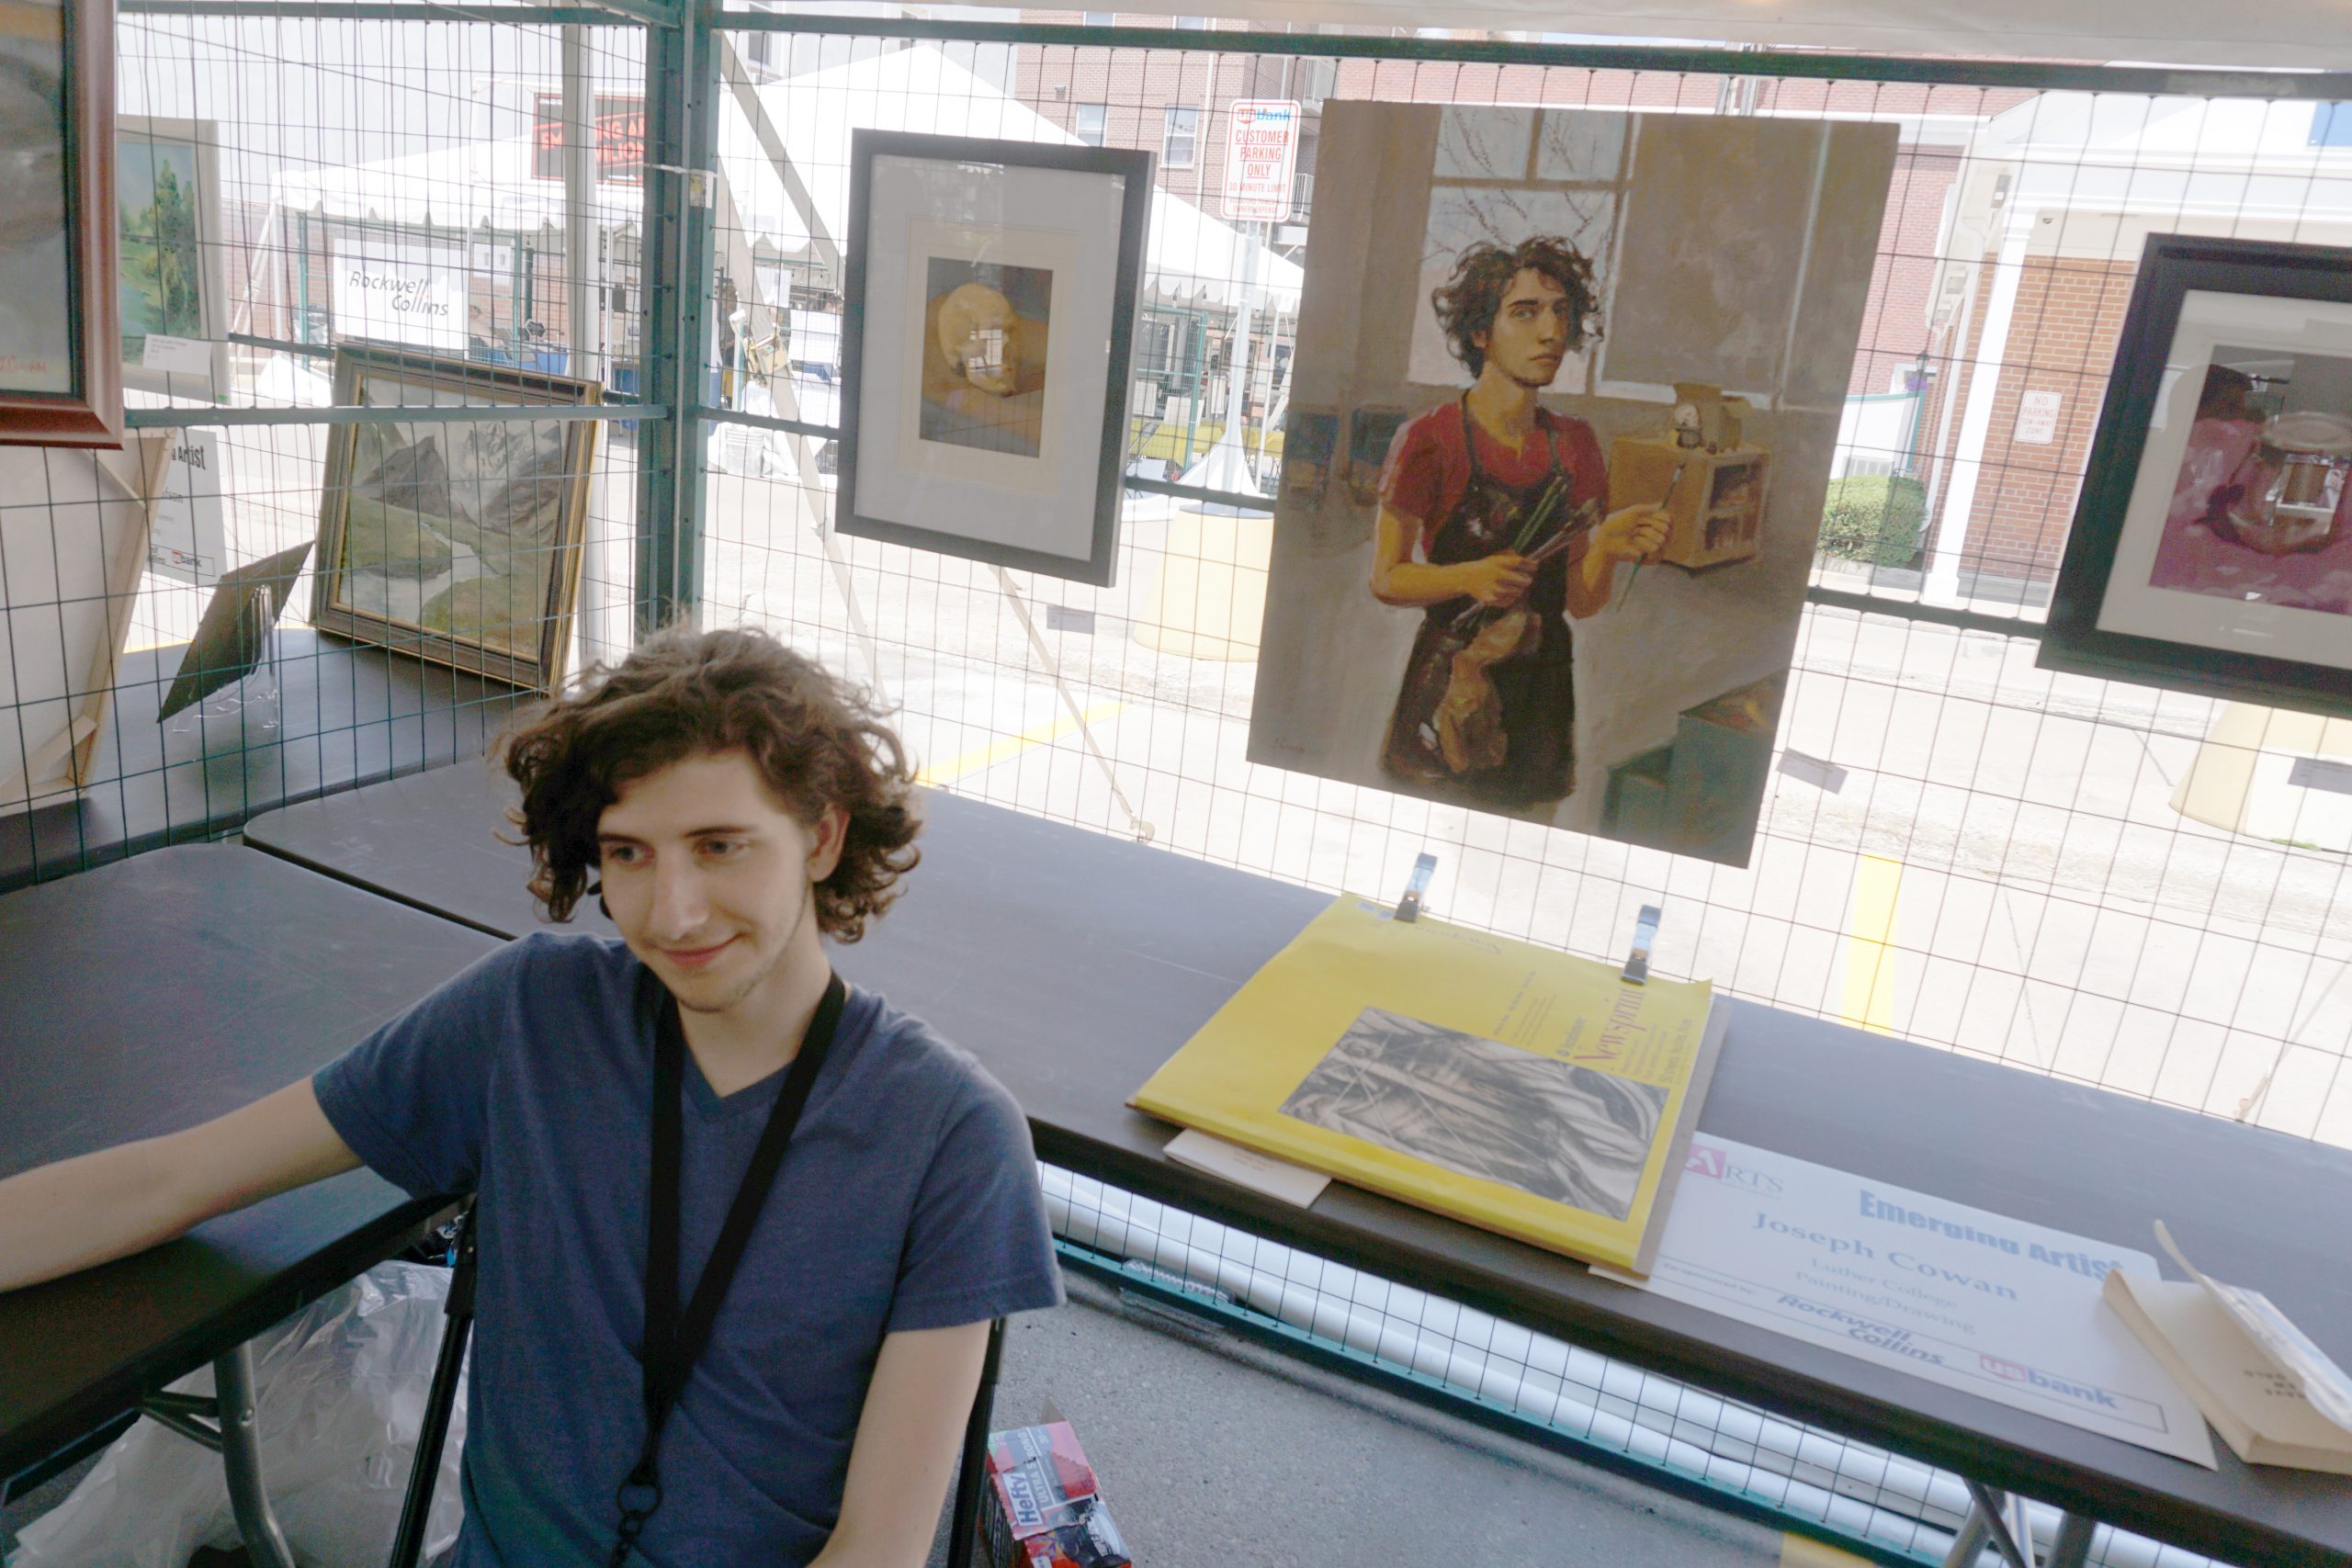 Emerging Artist Joseph Cowan with his self-portrait at the Summer of the Arts Festival